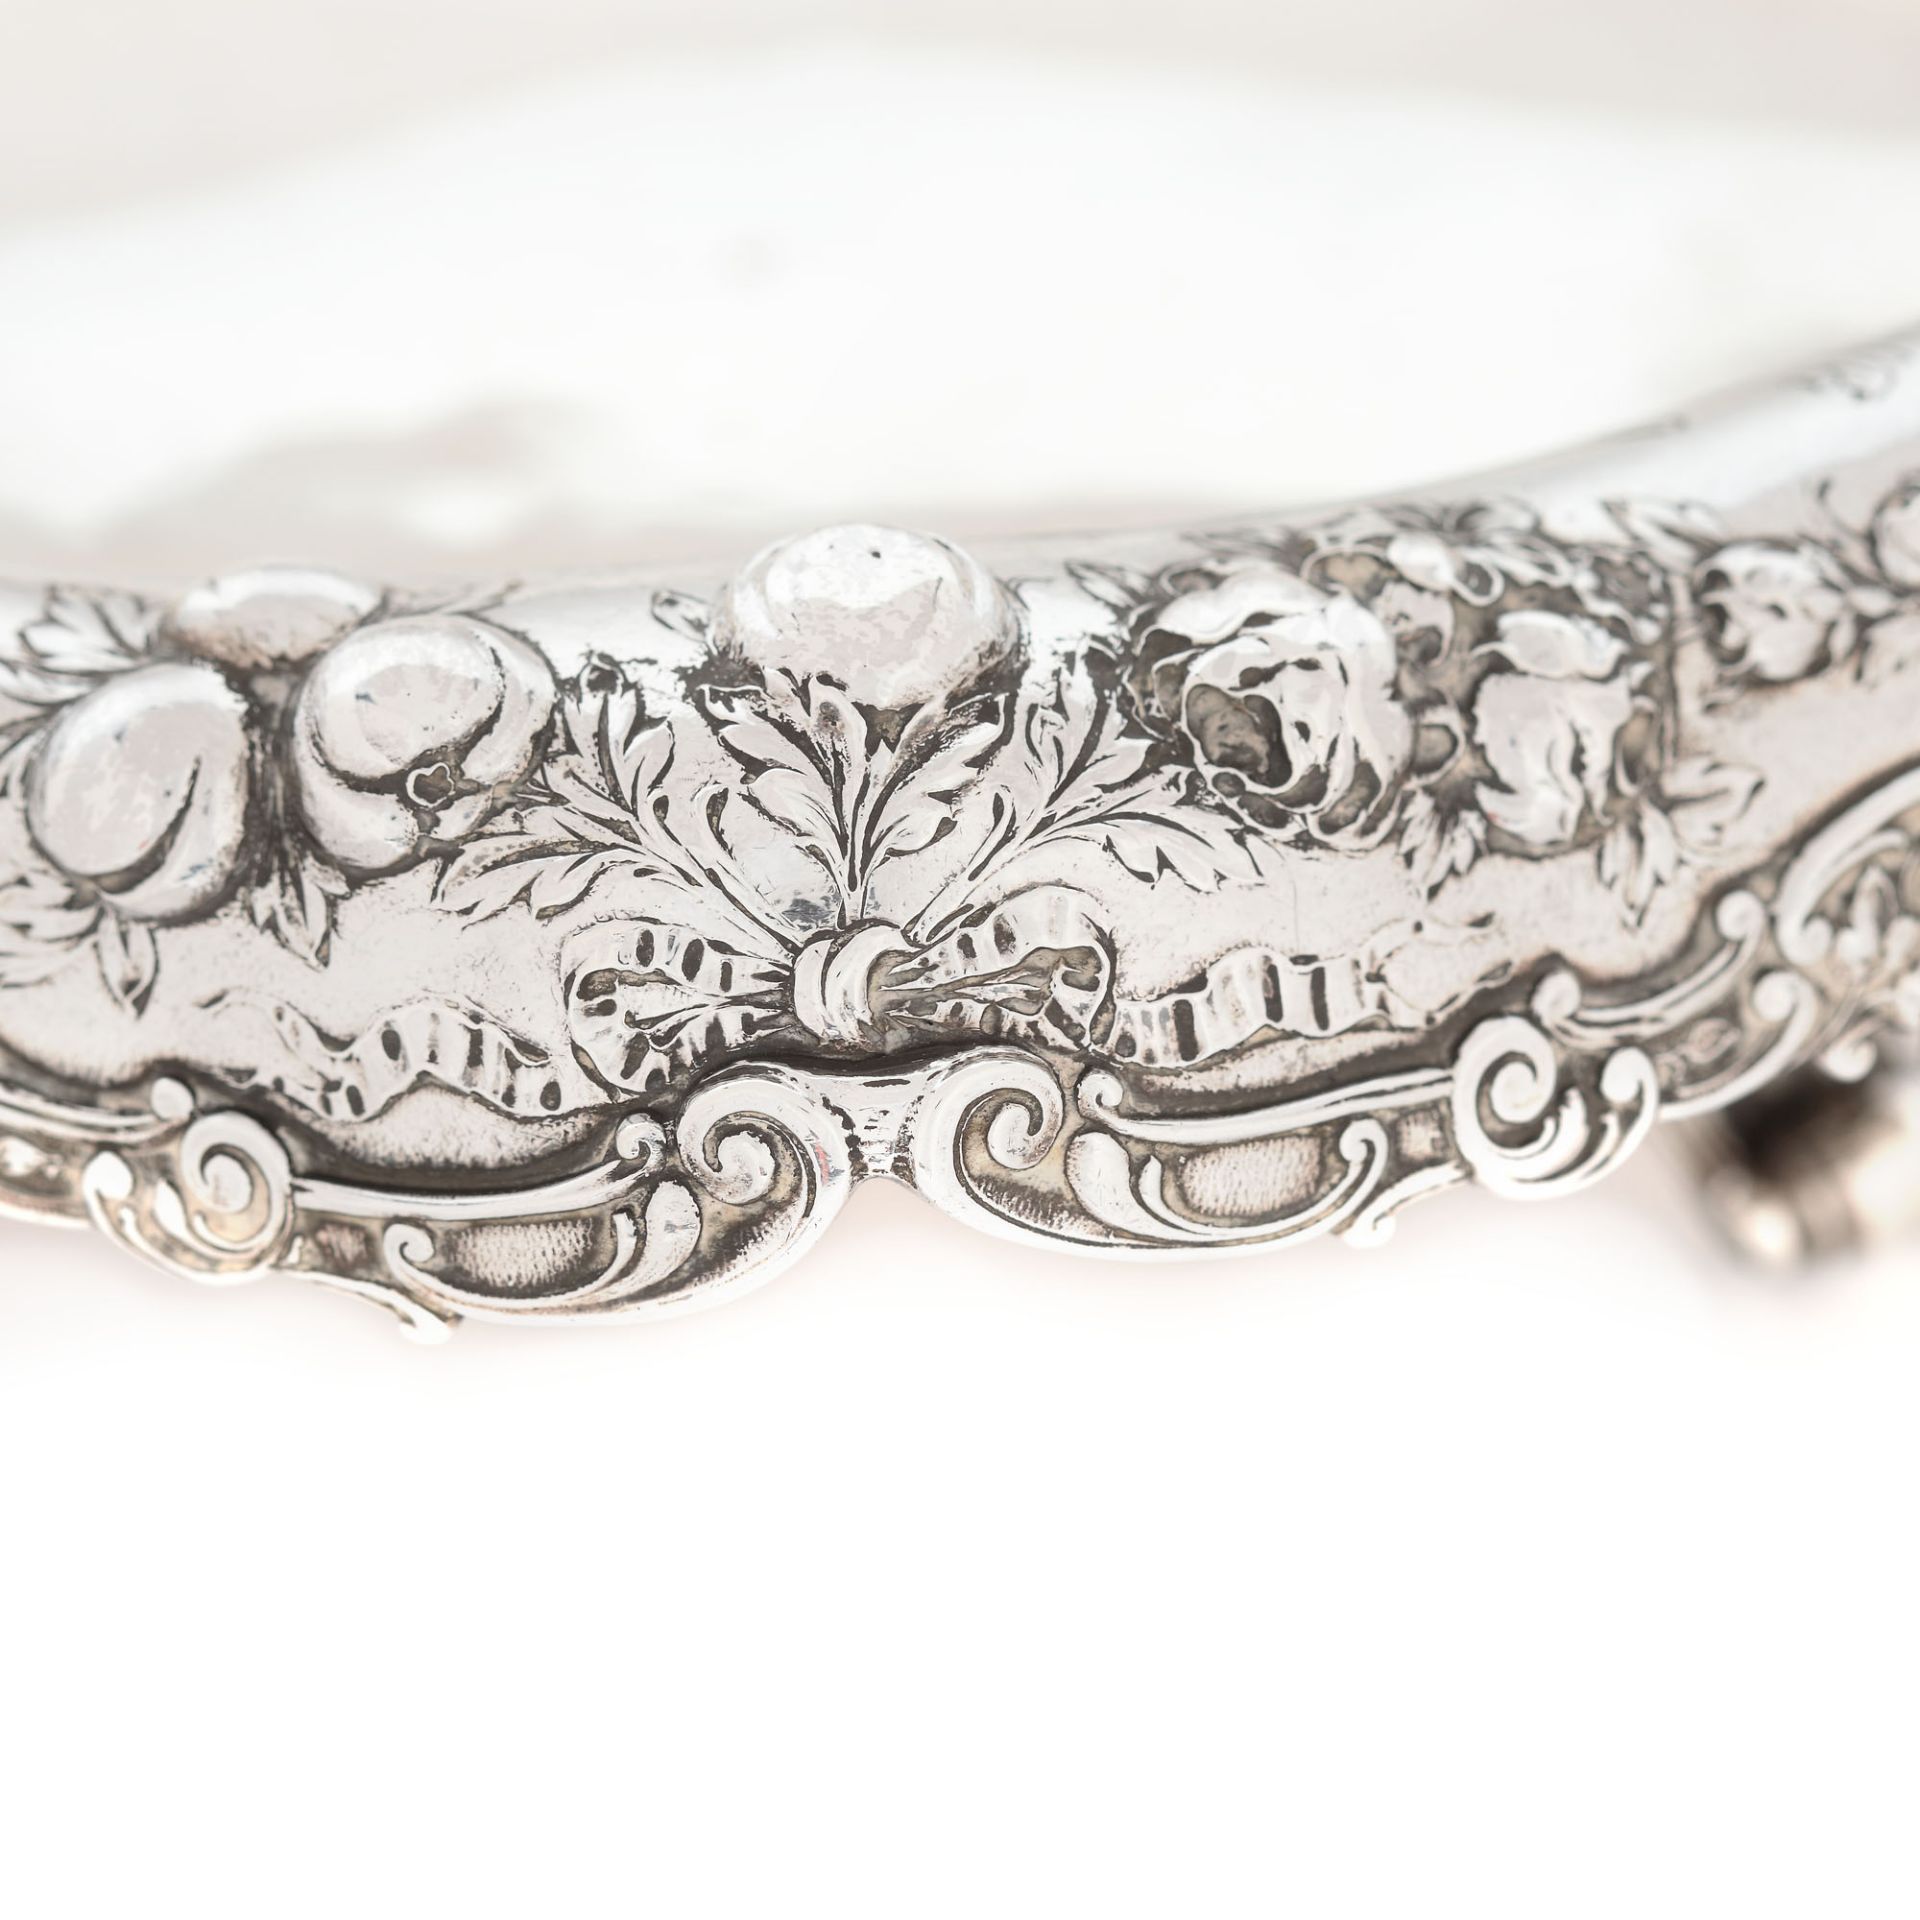 American workshop, Gorham fruit bowl, silver, decorated with flowers and fruits - Image 2 of 5